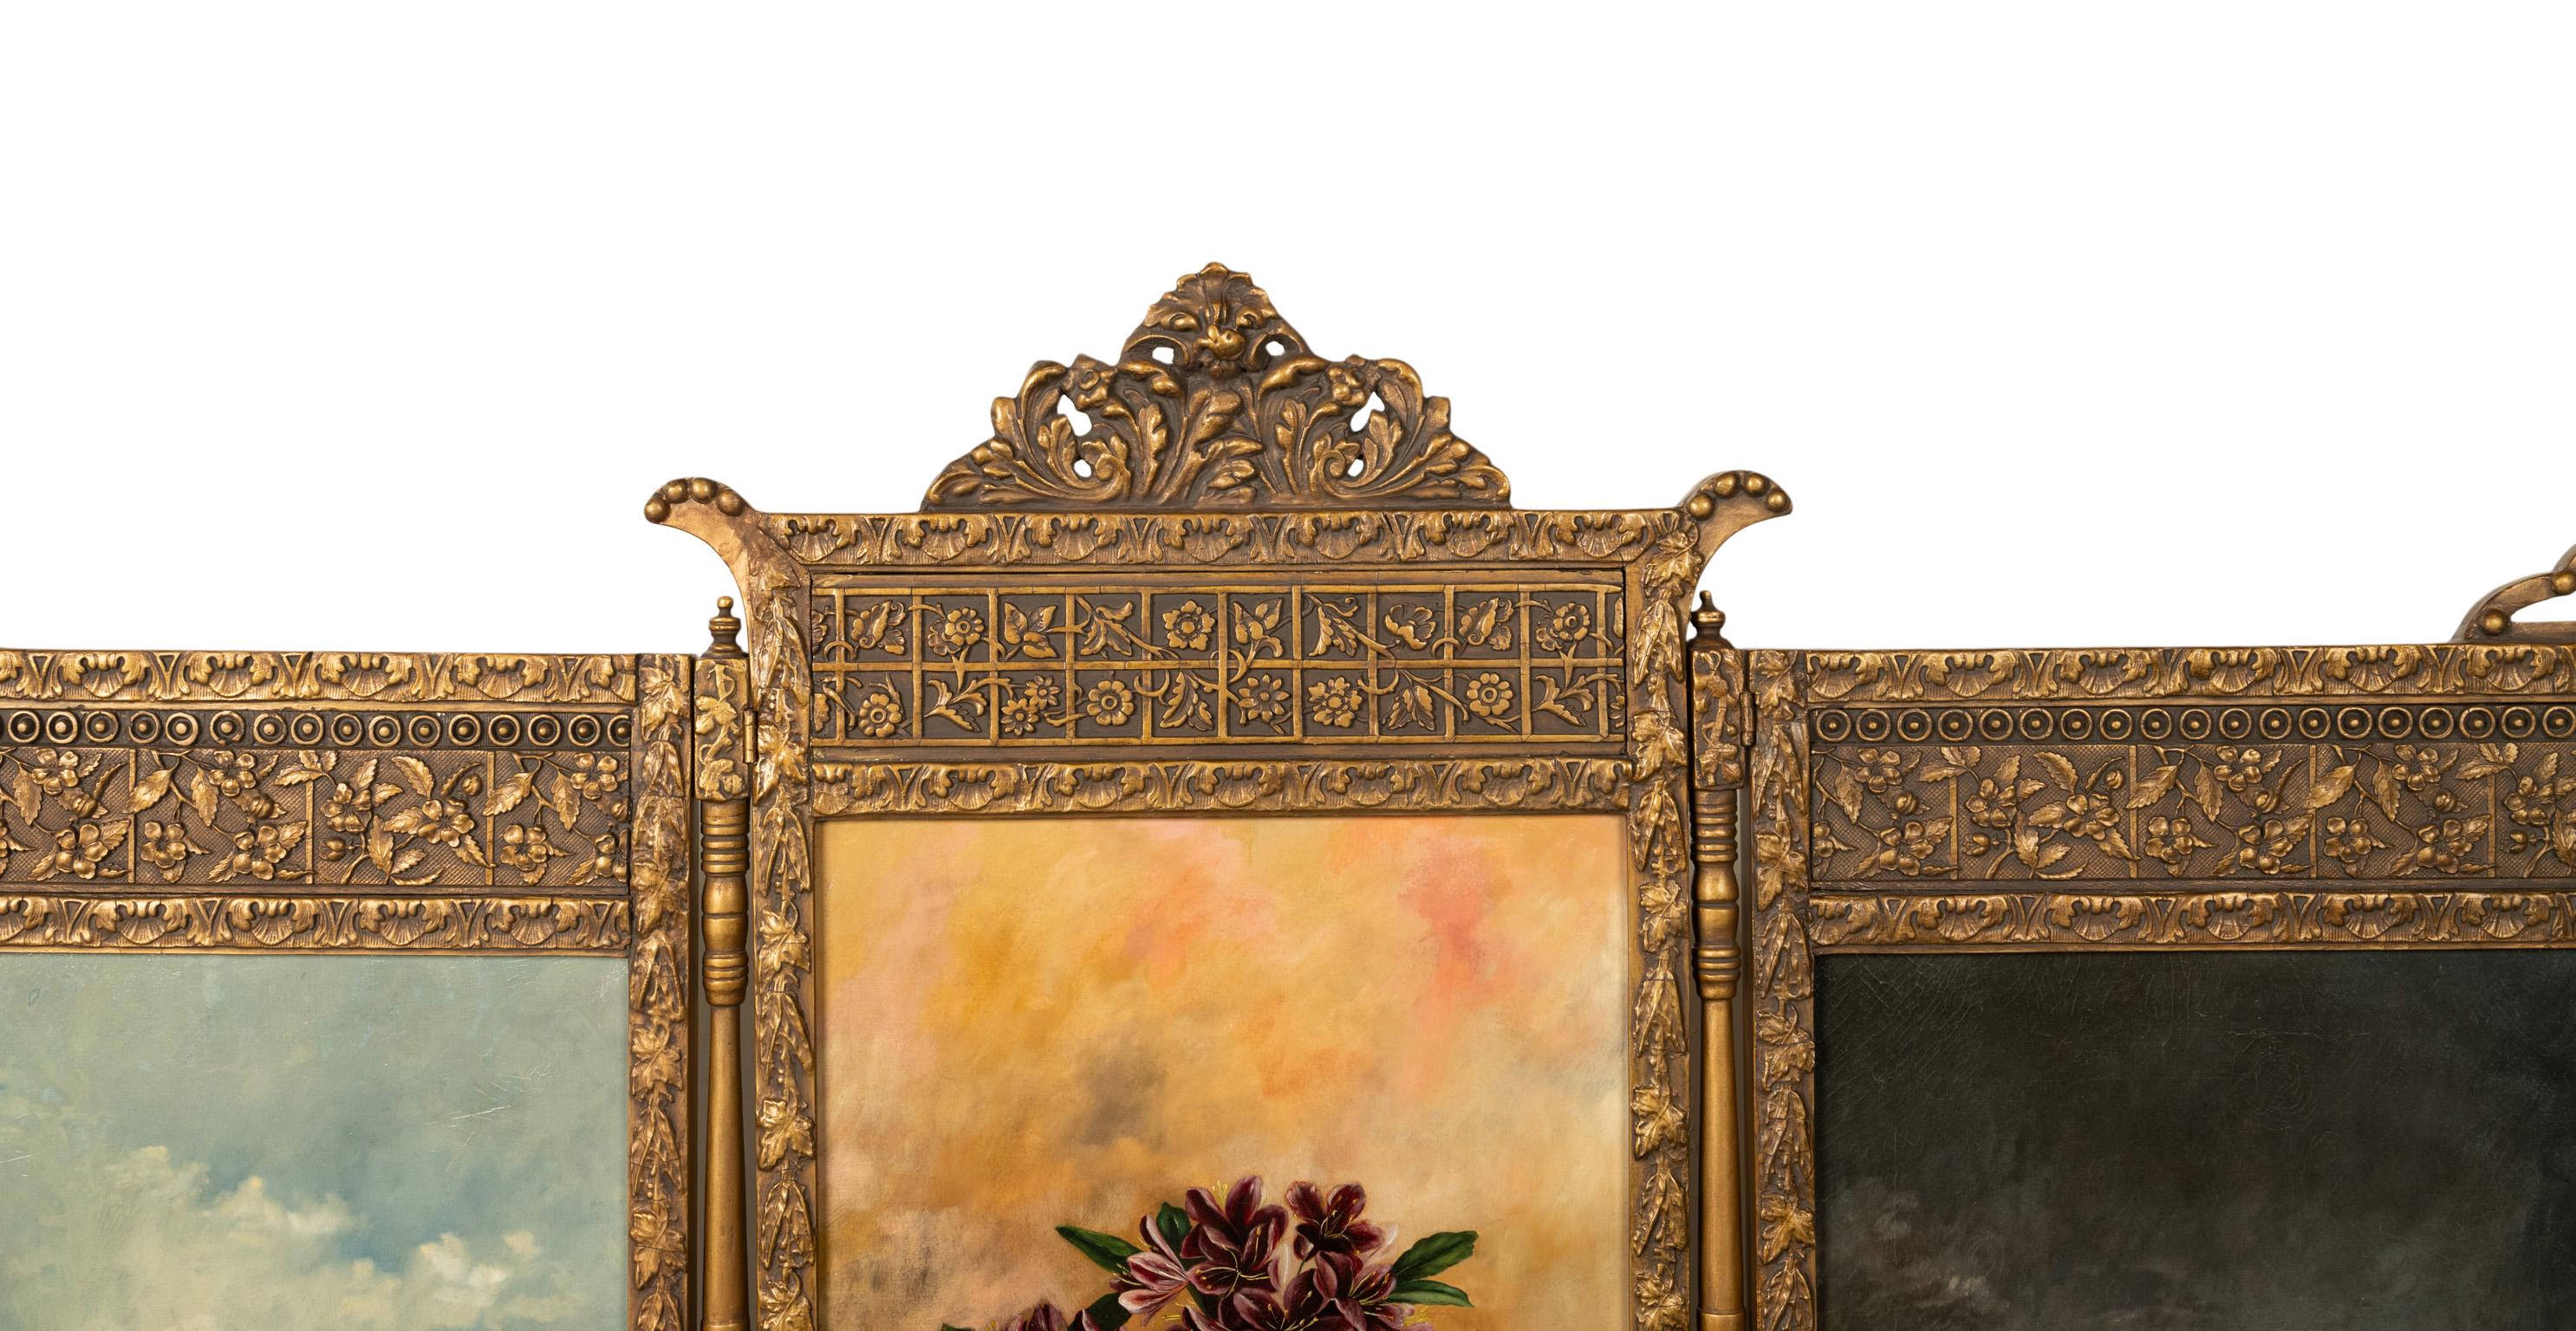  Antique Gilded Room Divider Screen Oil Painting Aesthetic Movement NY 1885 For Sale 1